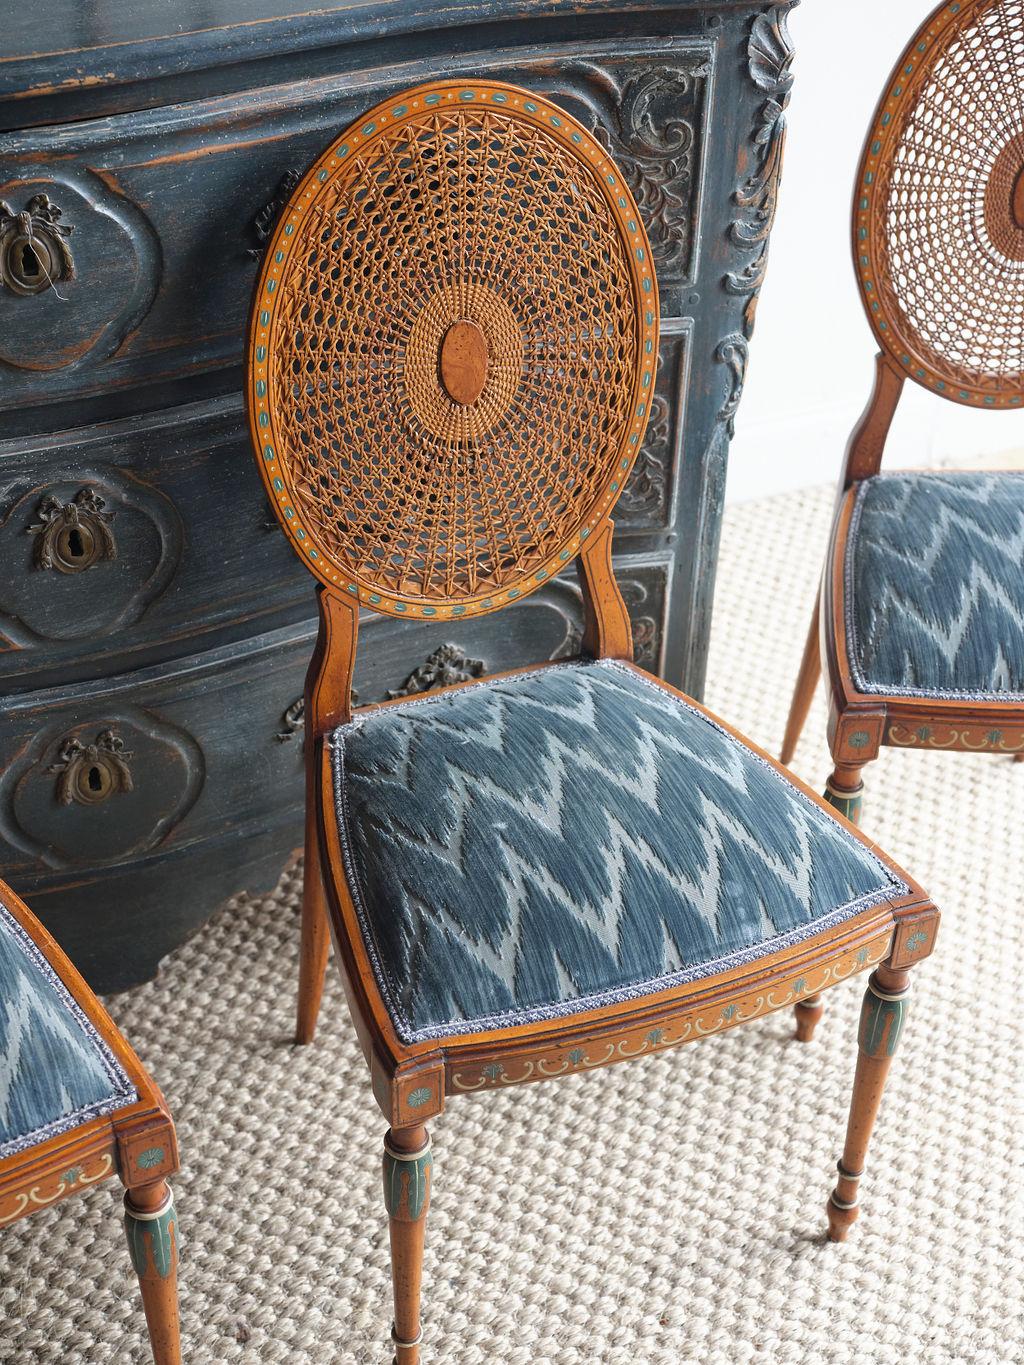 There simply are no other dining chairs out there like this set of 6 Sheraton style chairs. Featuring oval cane backs, chevron patterned blue and white fabric seats, and hand-painted details on the wood sections. There are 2 armed end chairs, and